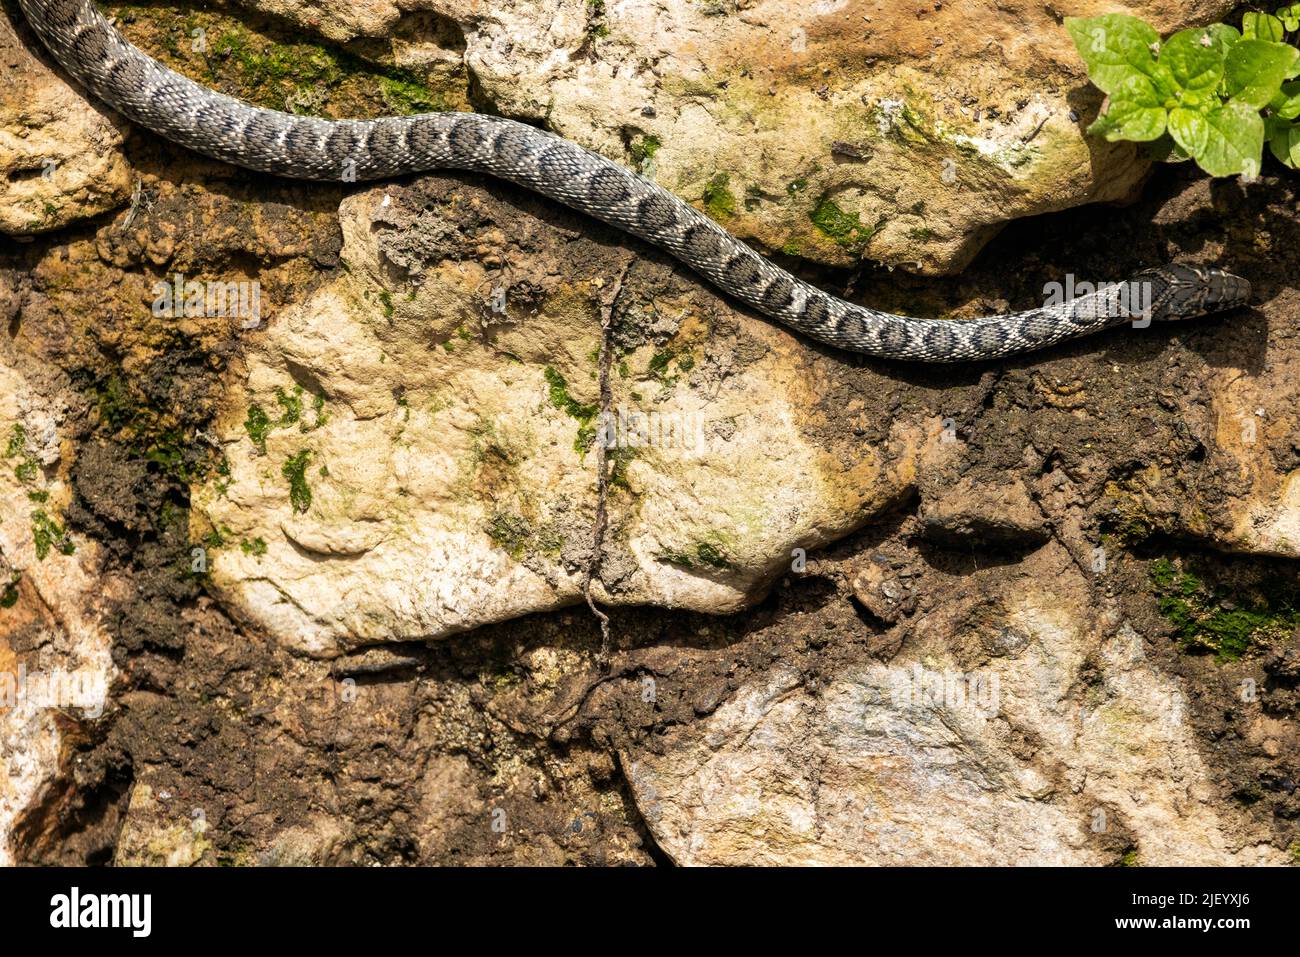 Horse Whip Snake seen hugging a wall along the drying river bed of the Rio Jate, La Herradura, Almuneca, Andalucia, Spain. 20th June 2022 Stock Photo